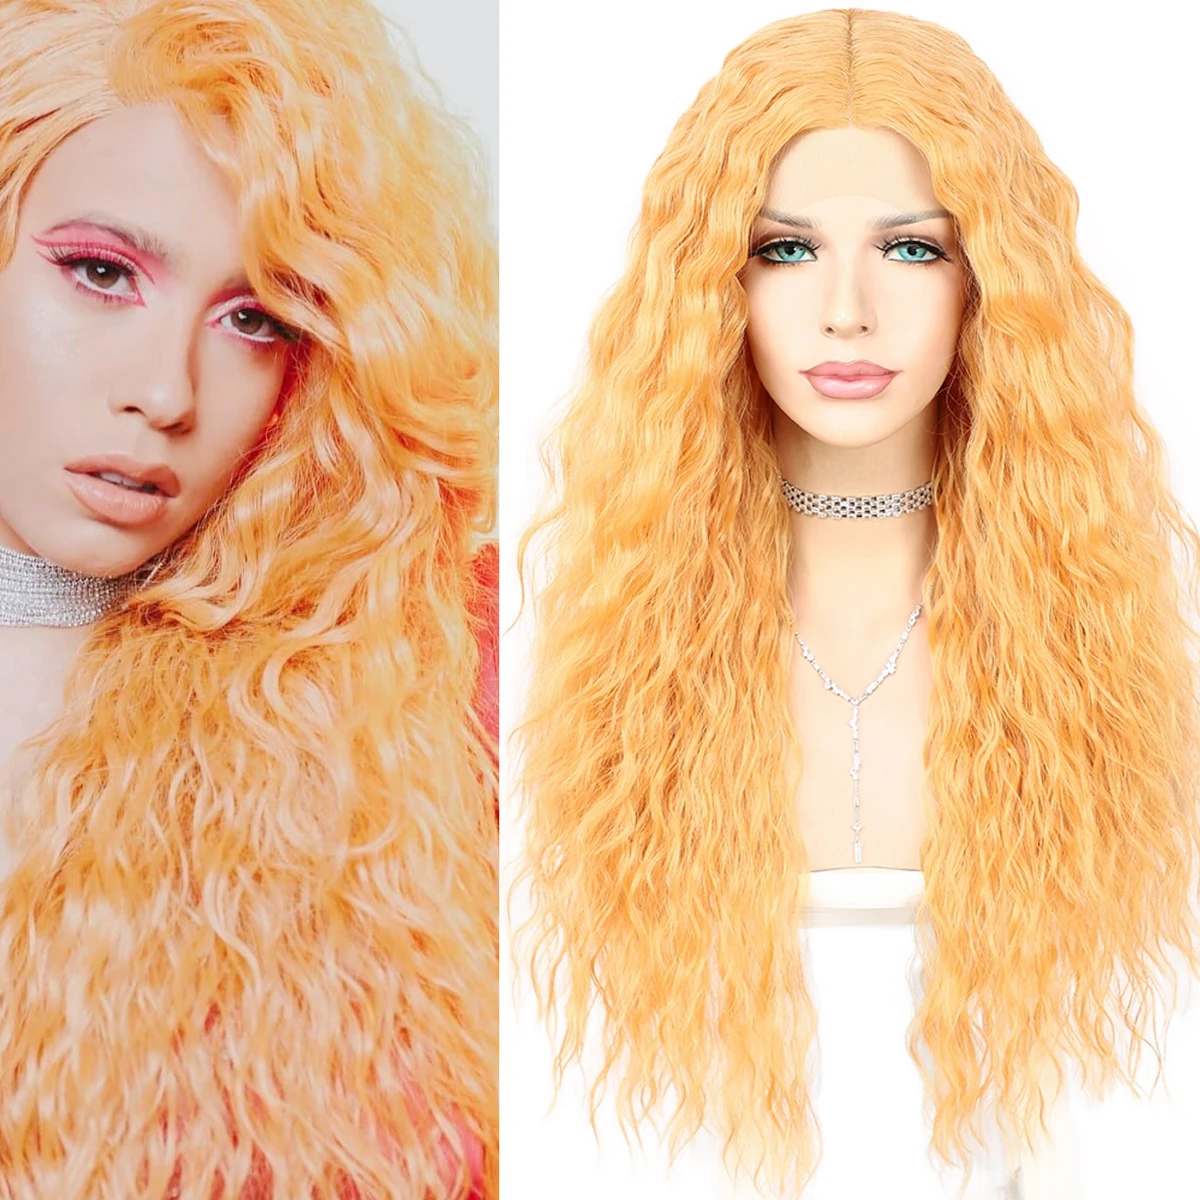 

Krismile Long Curly Synthetic Lace Wigs Colored T Part 240# Wigs for Black Women 26 Inches Cosplay Drag Queen High Temperature